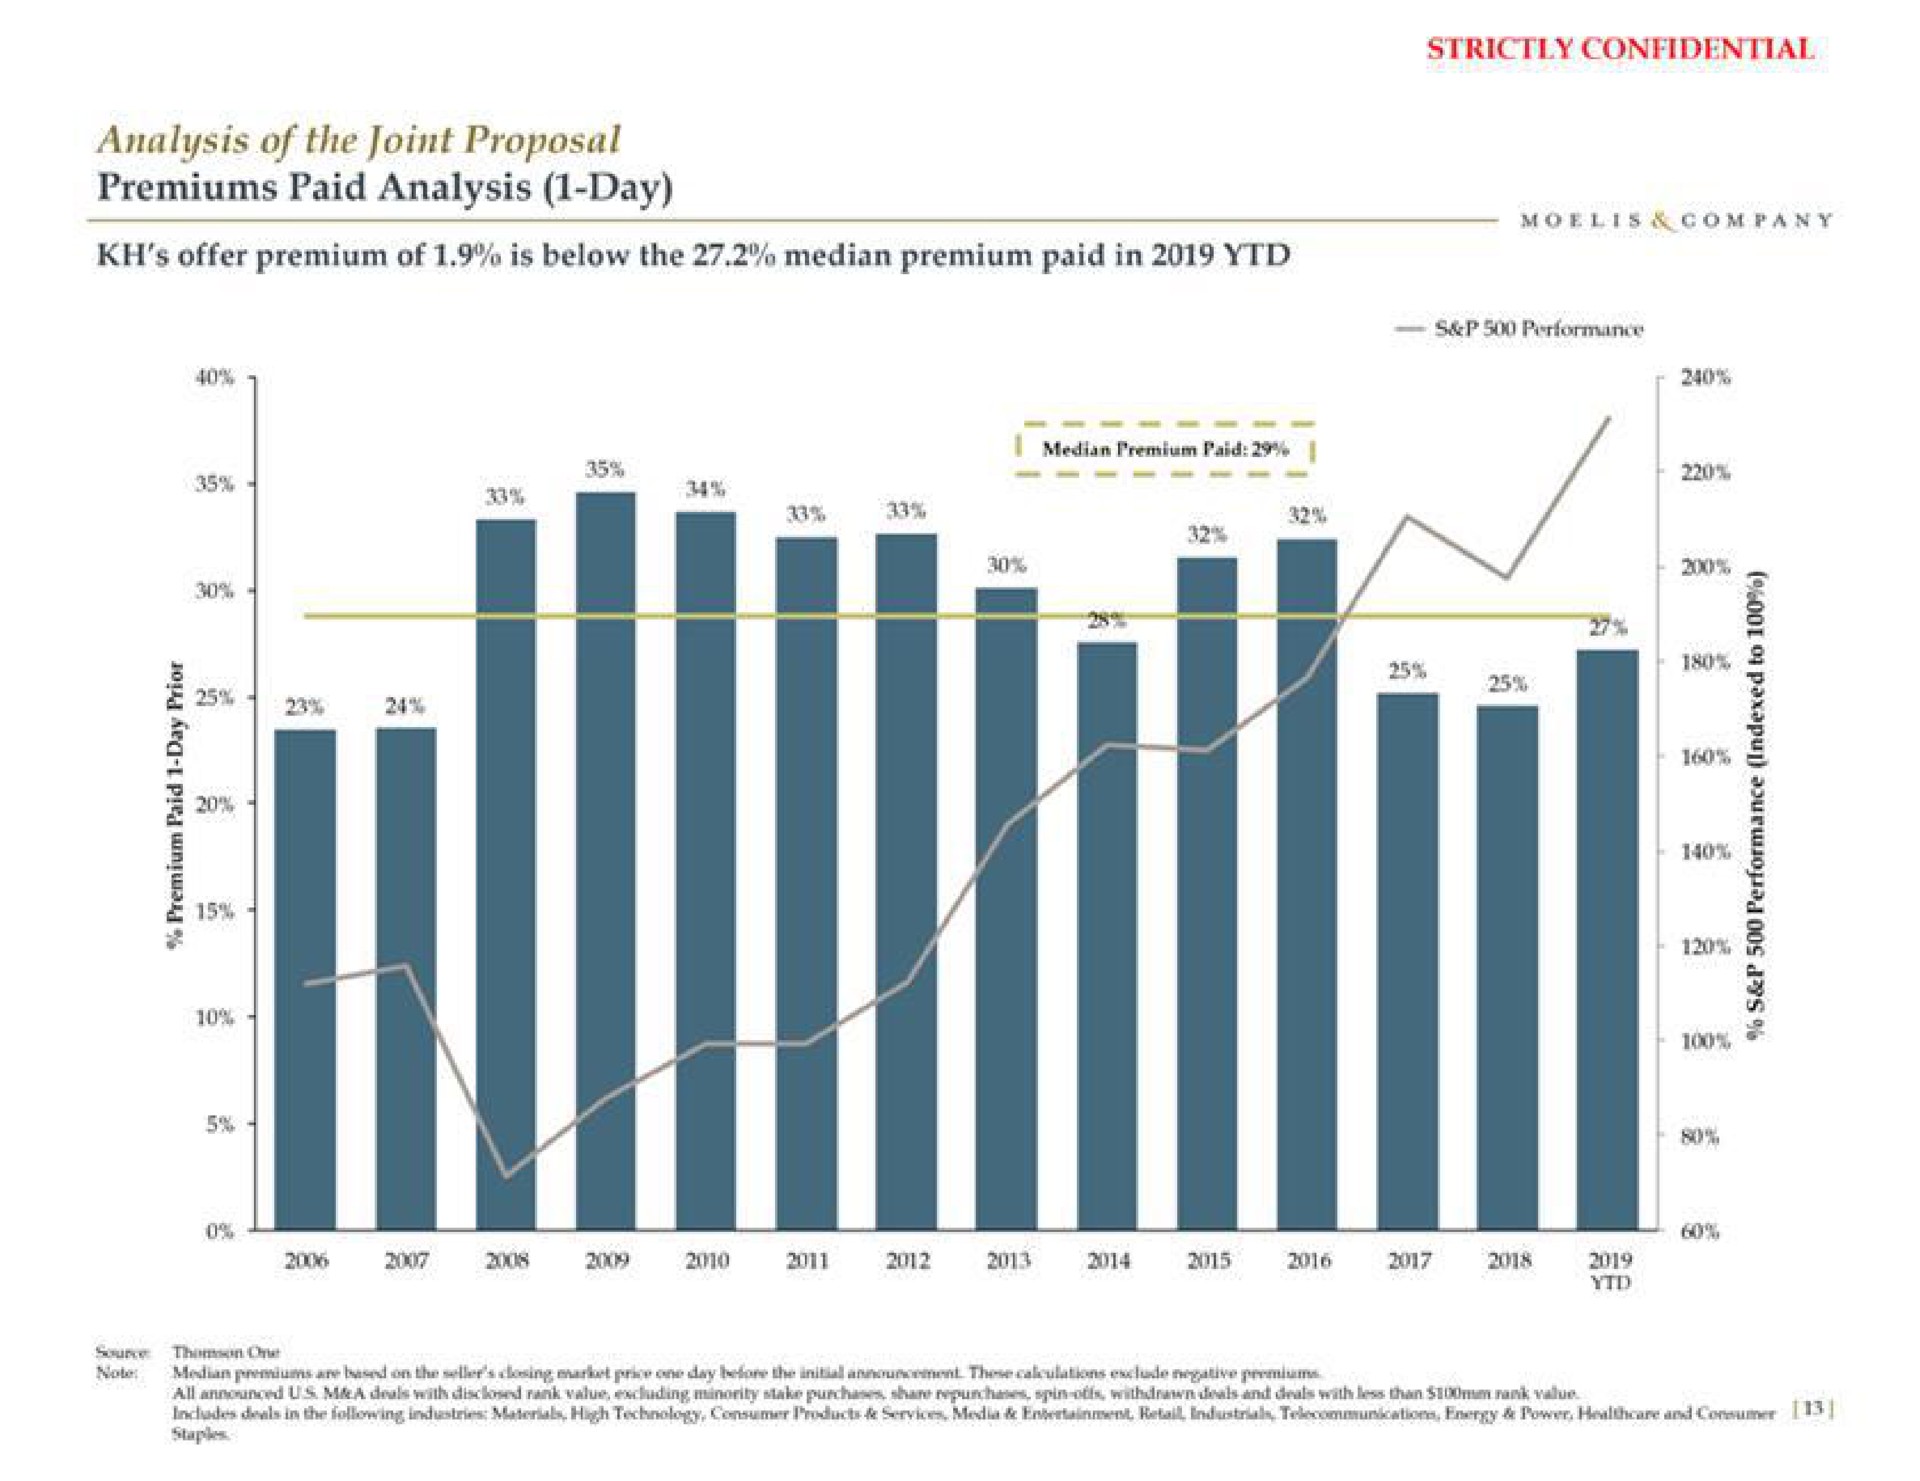 analysis of the joint proposal premiums paid analysis day | Moelis & Company